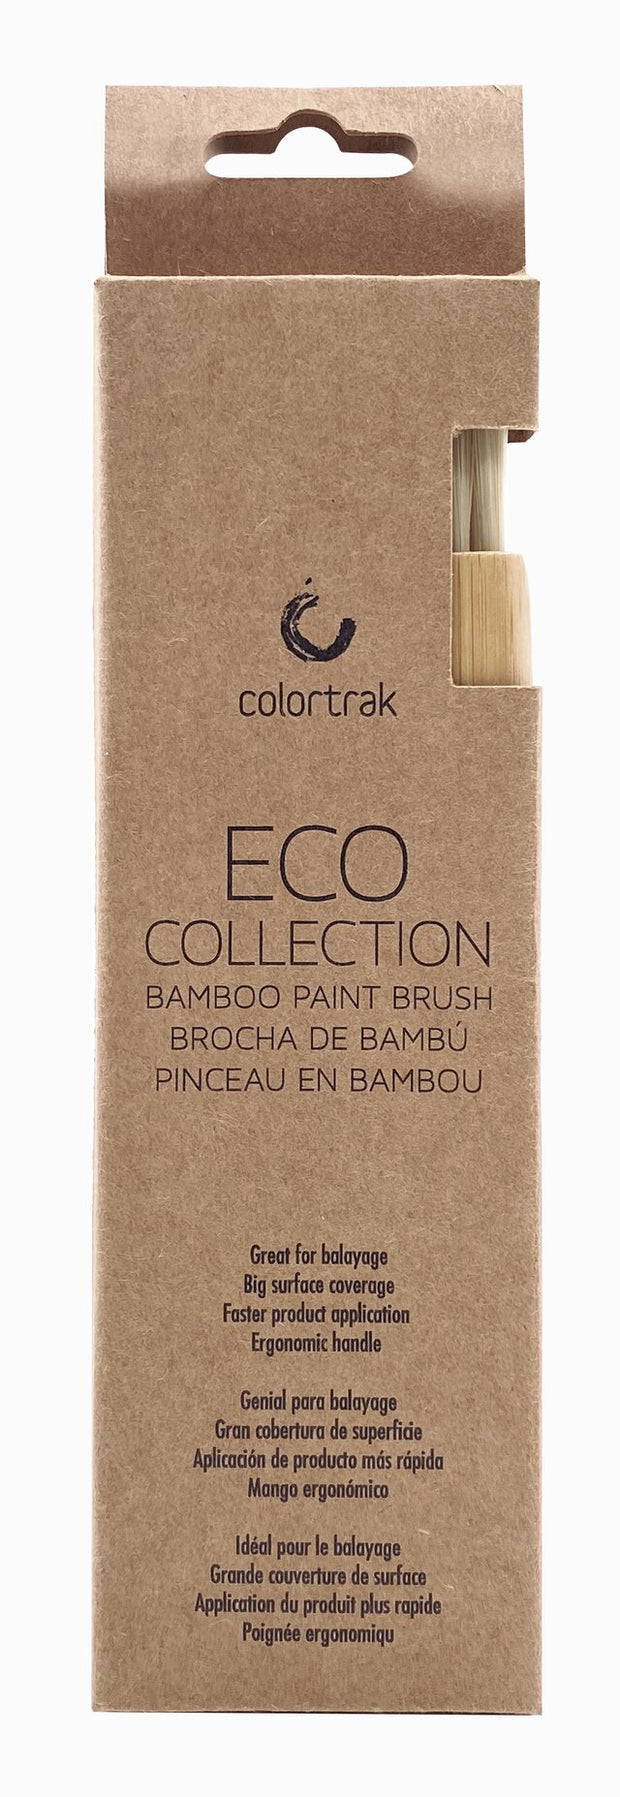 Colortrak - Eco Collection - Bamboo Paint Brush